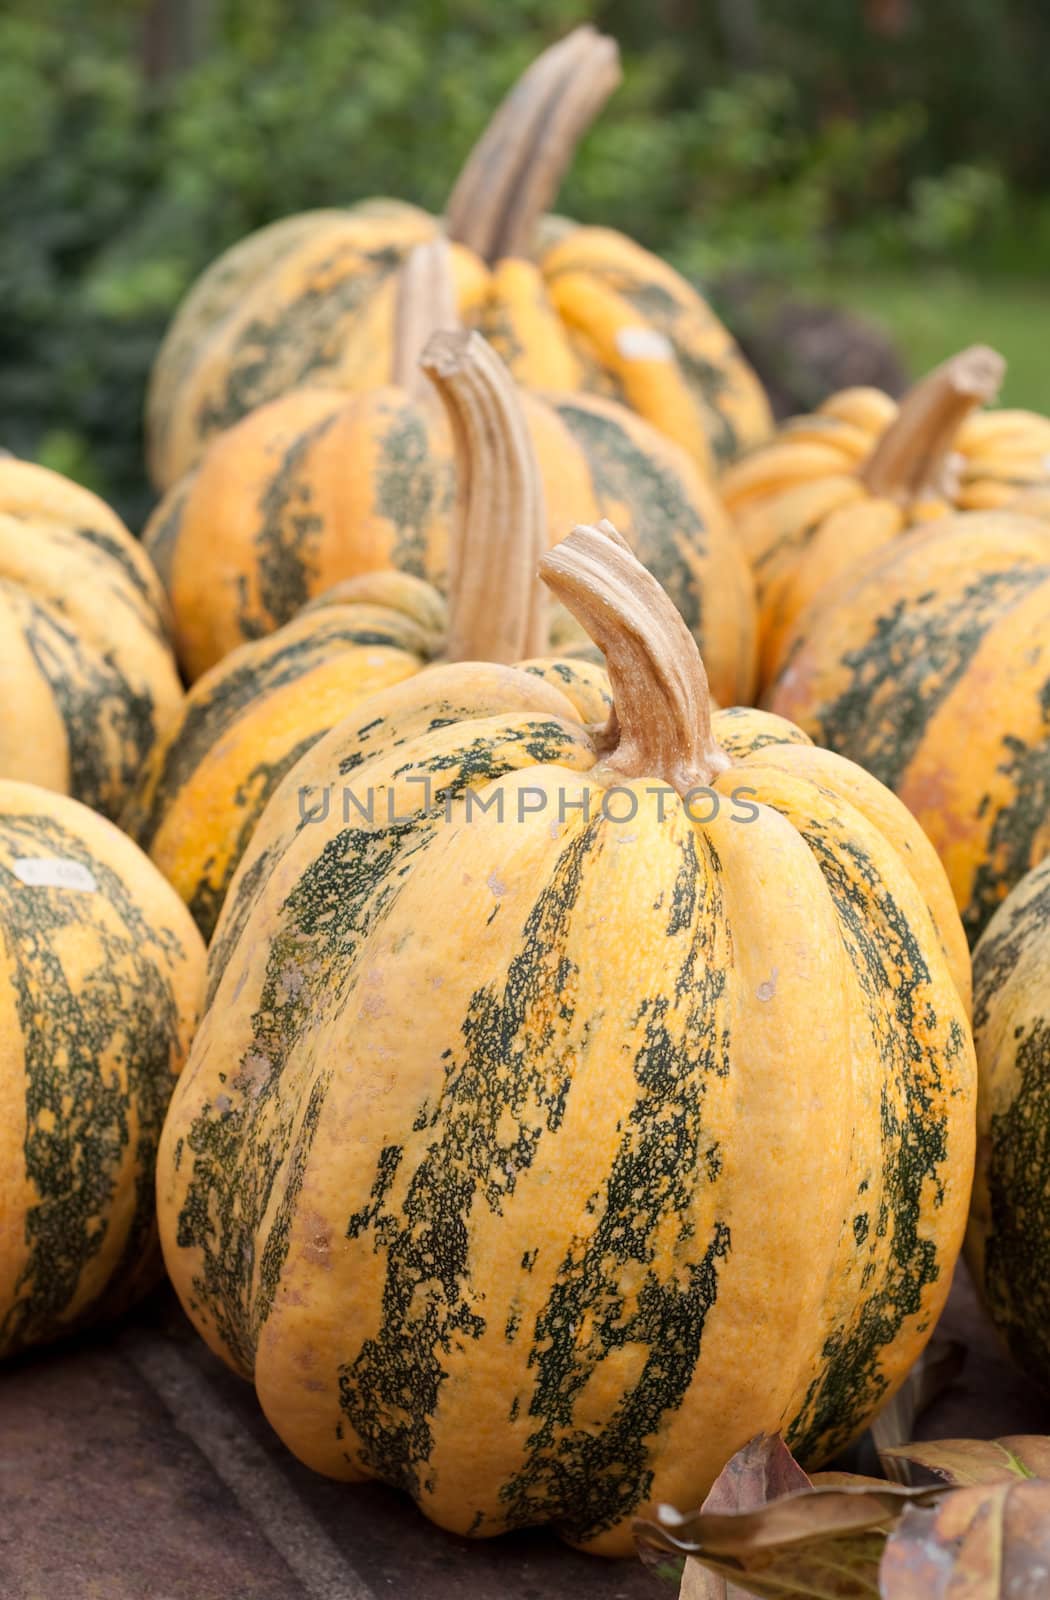 Colorful Pumpkin Collection At The Autumn Market